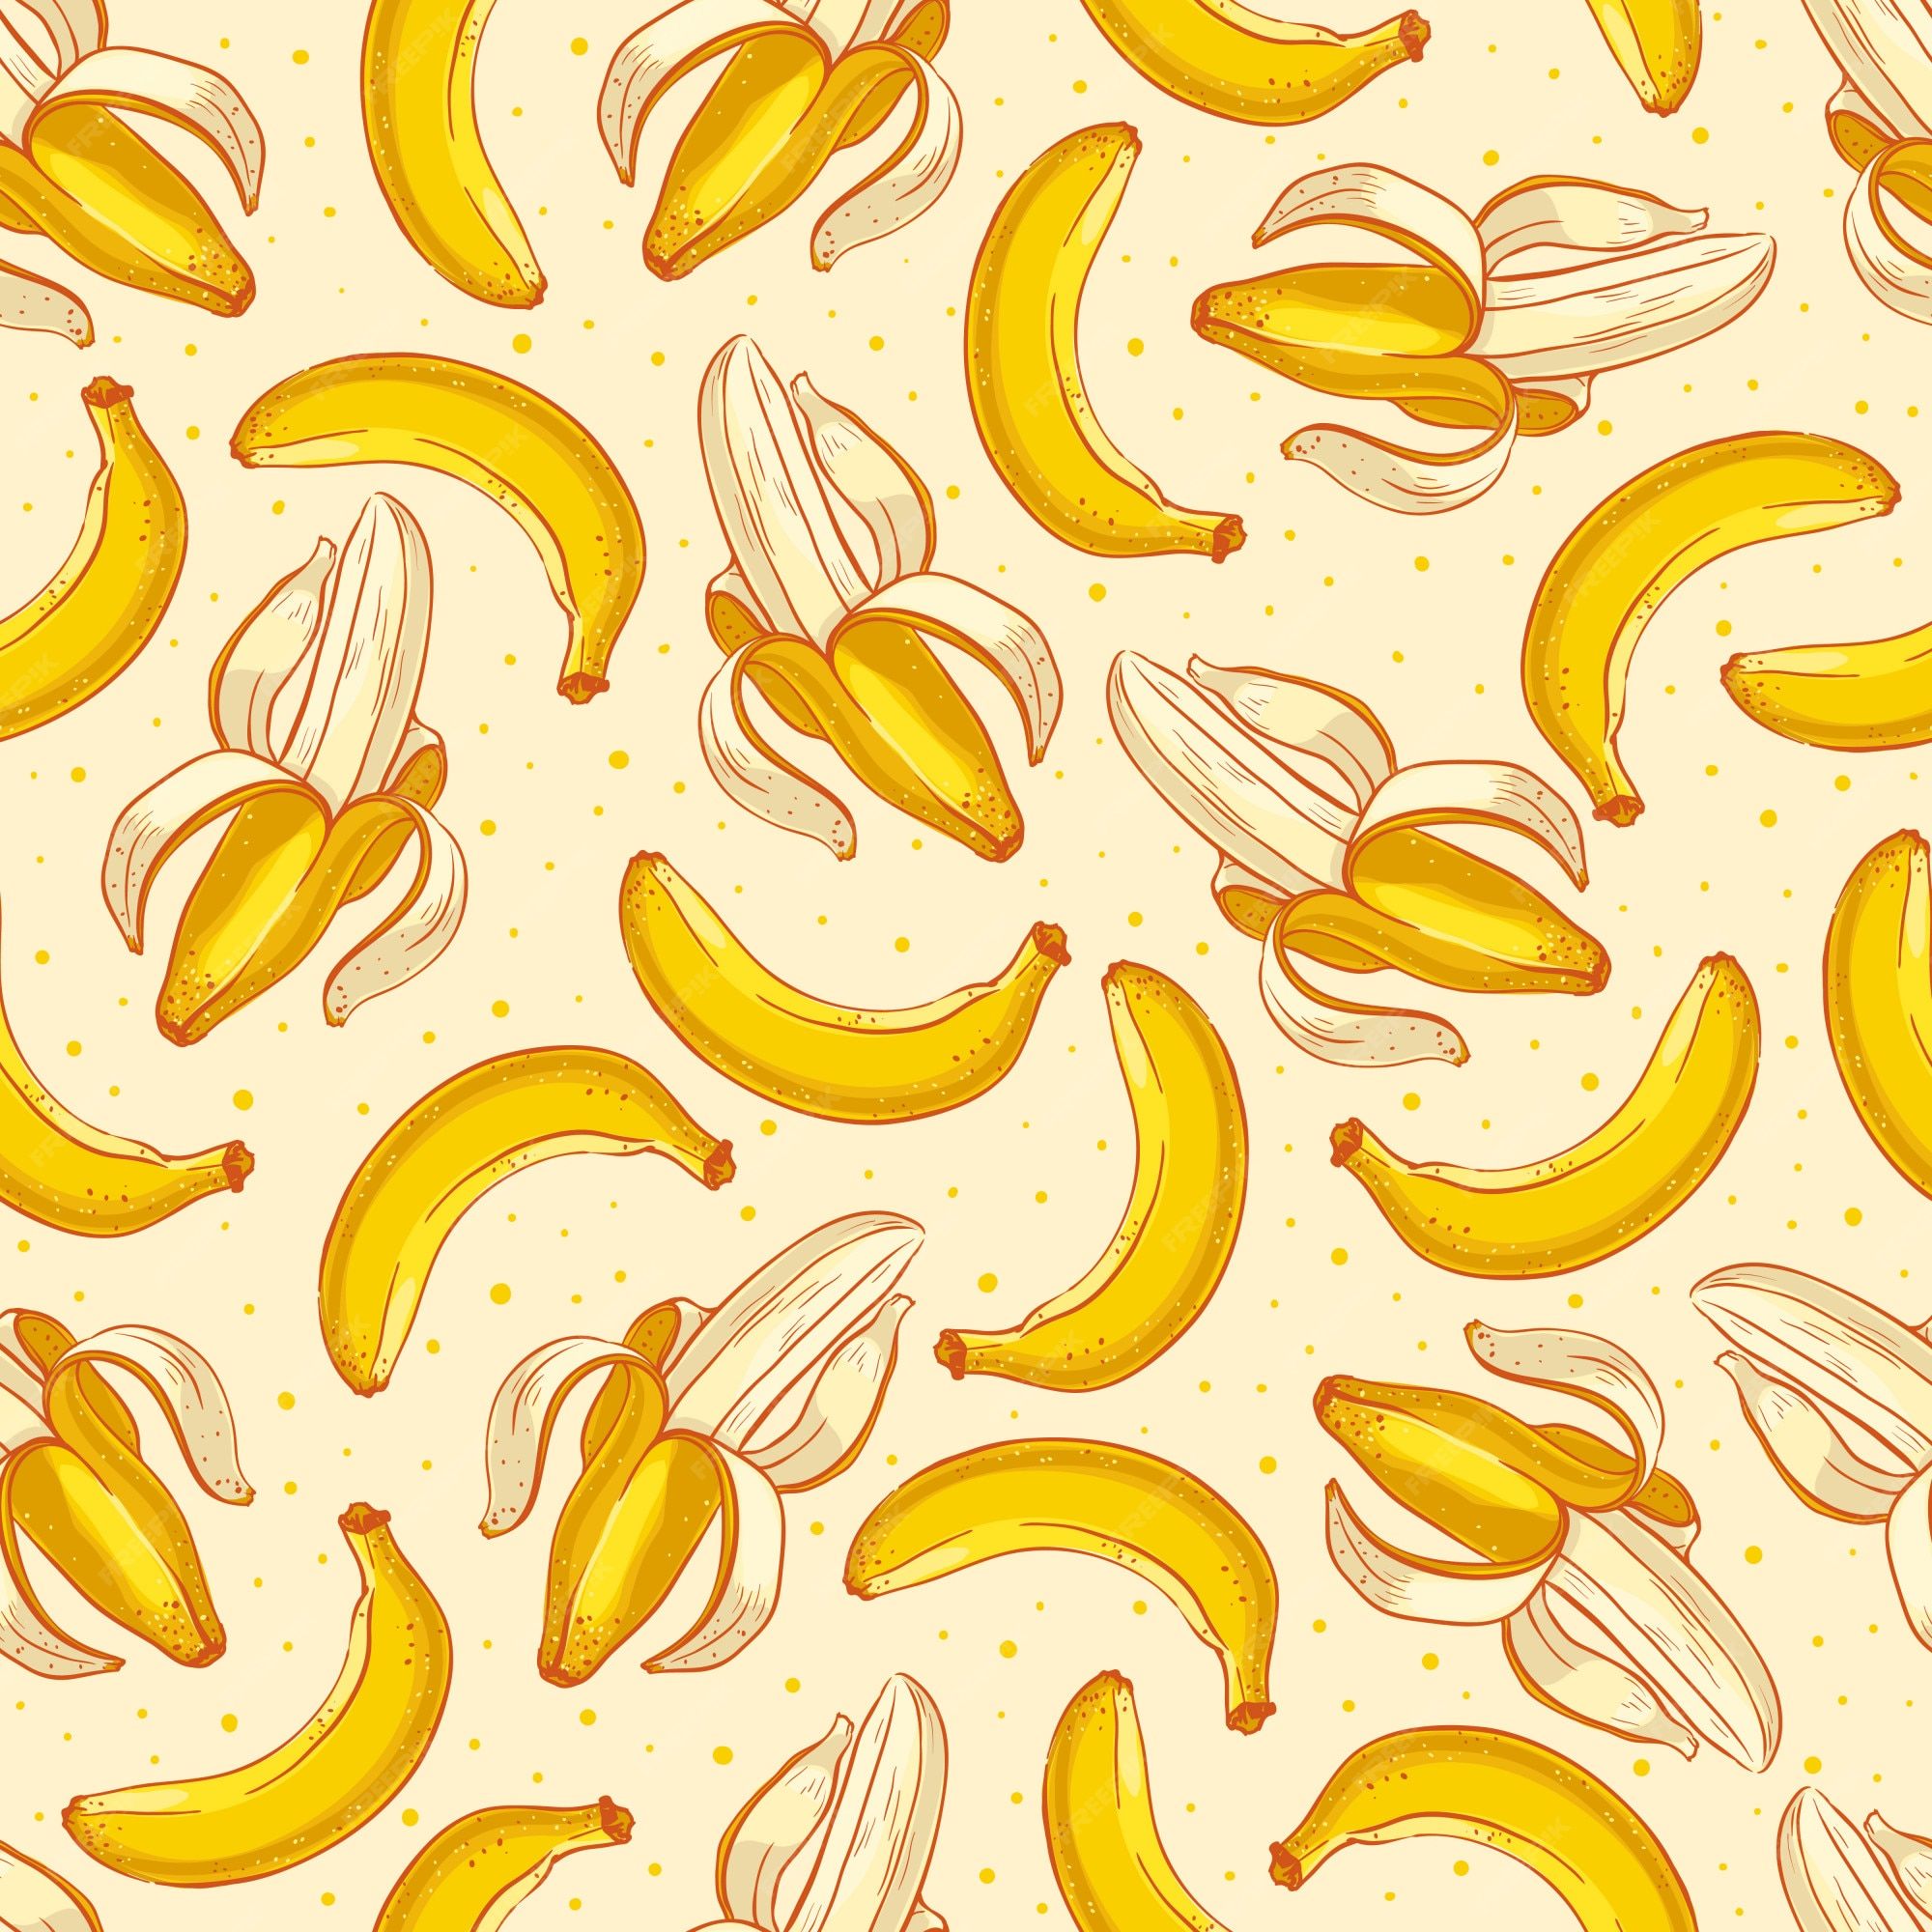 Premium Vector. Cute seamless background with yellow bananas